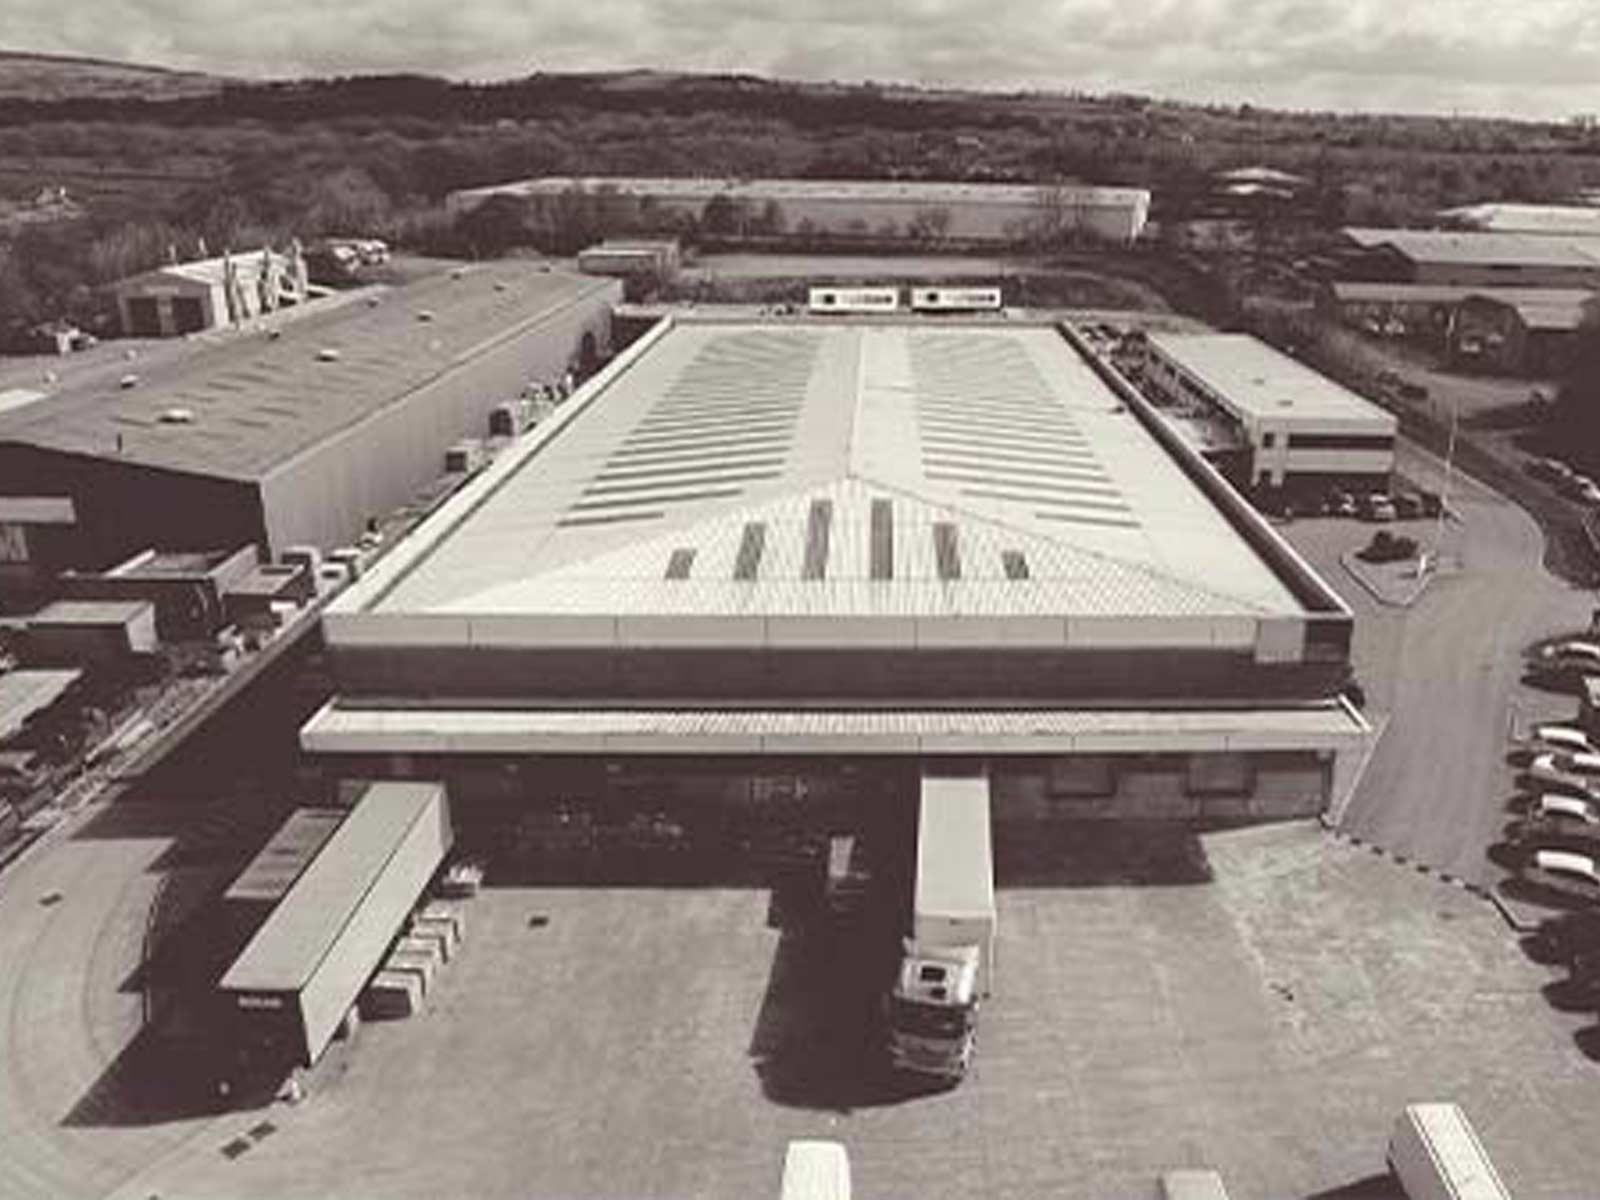 A birds-eye view of the Sigma 3 plant with delivery bays and carpark